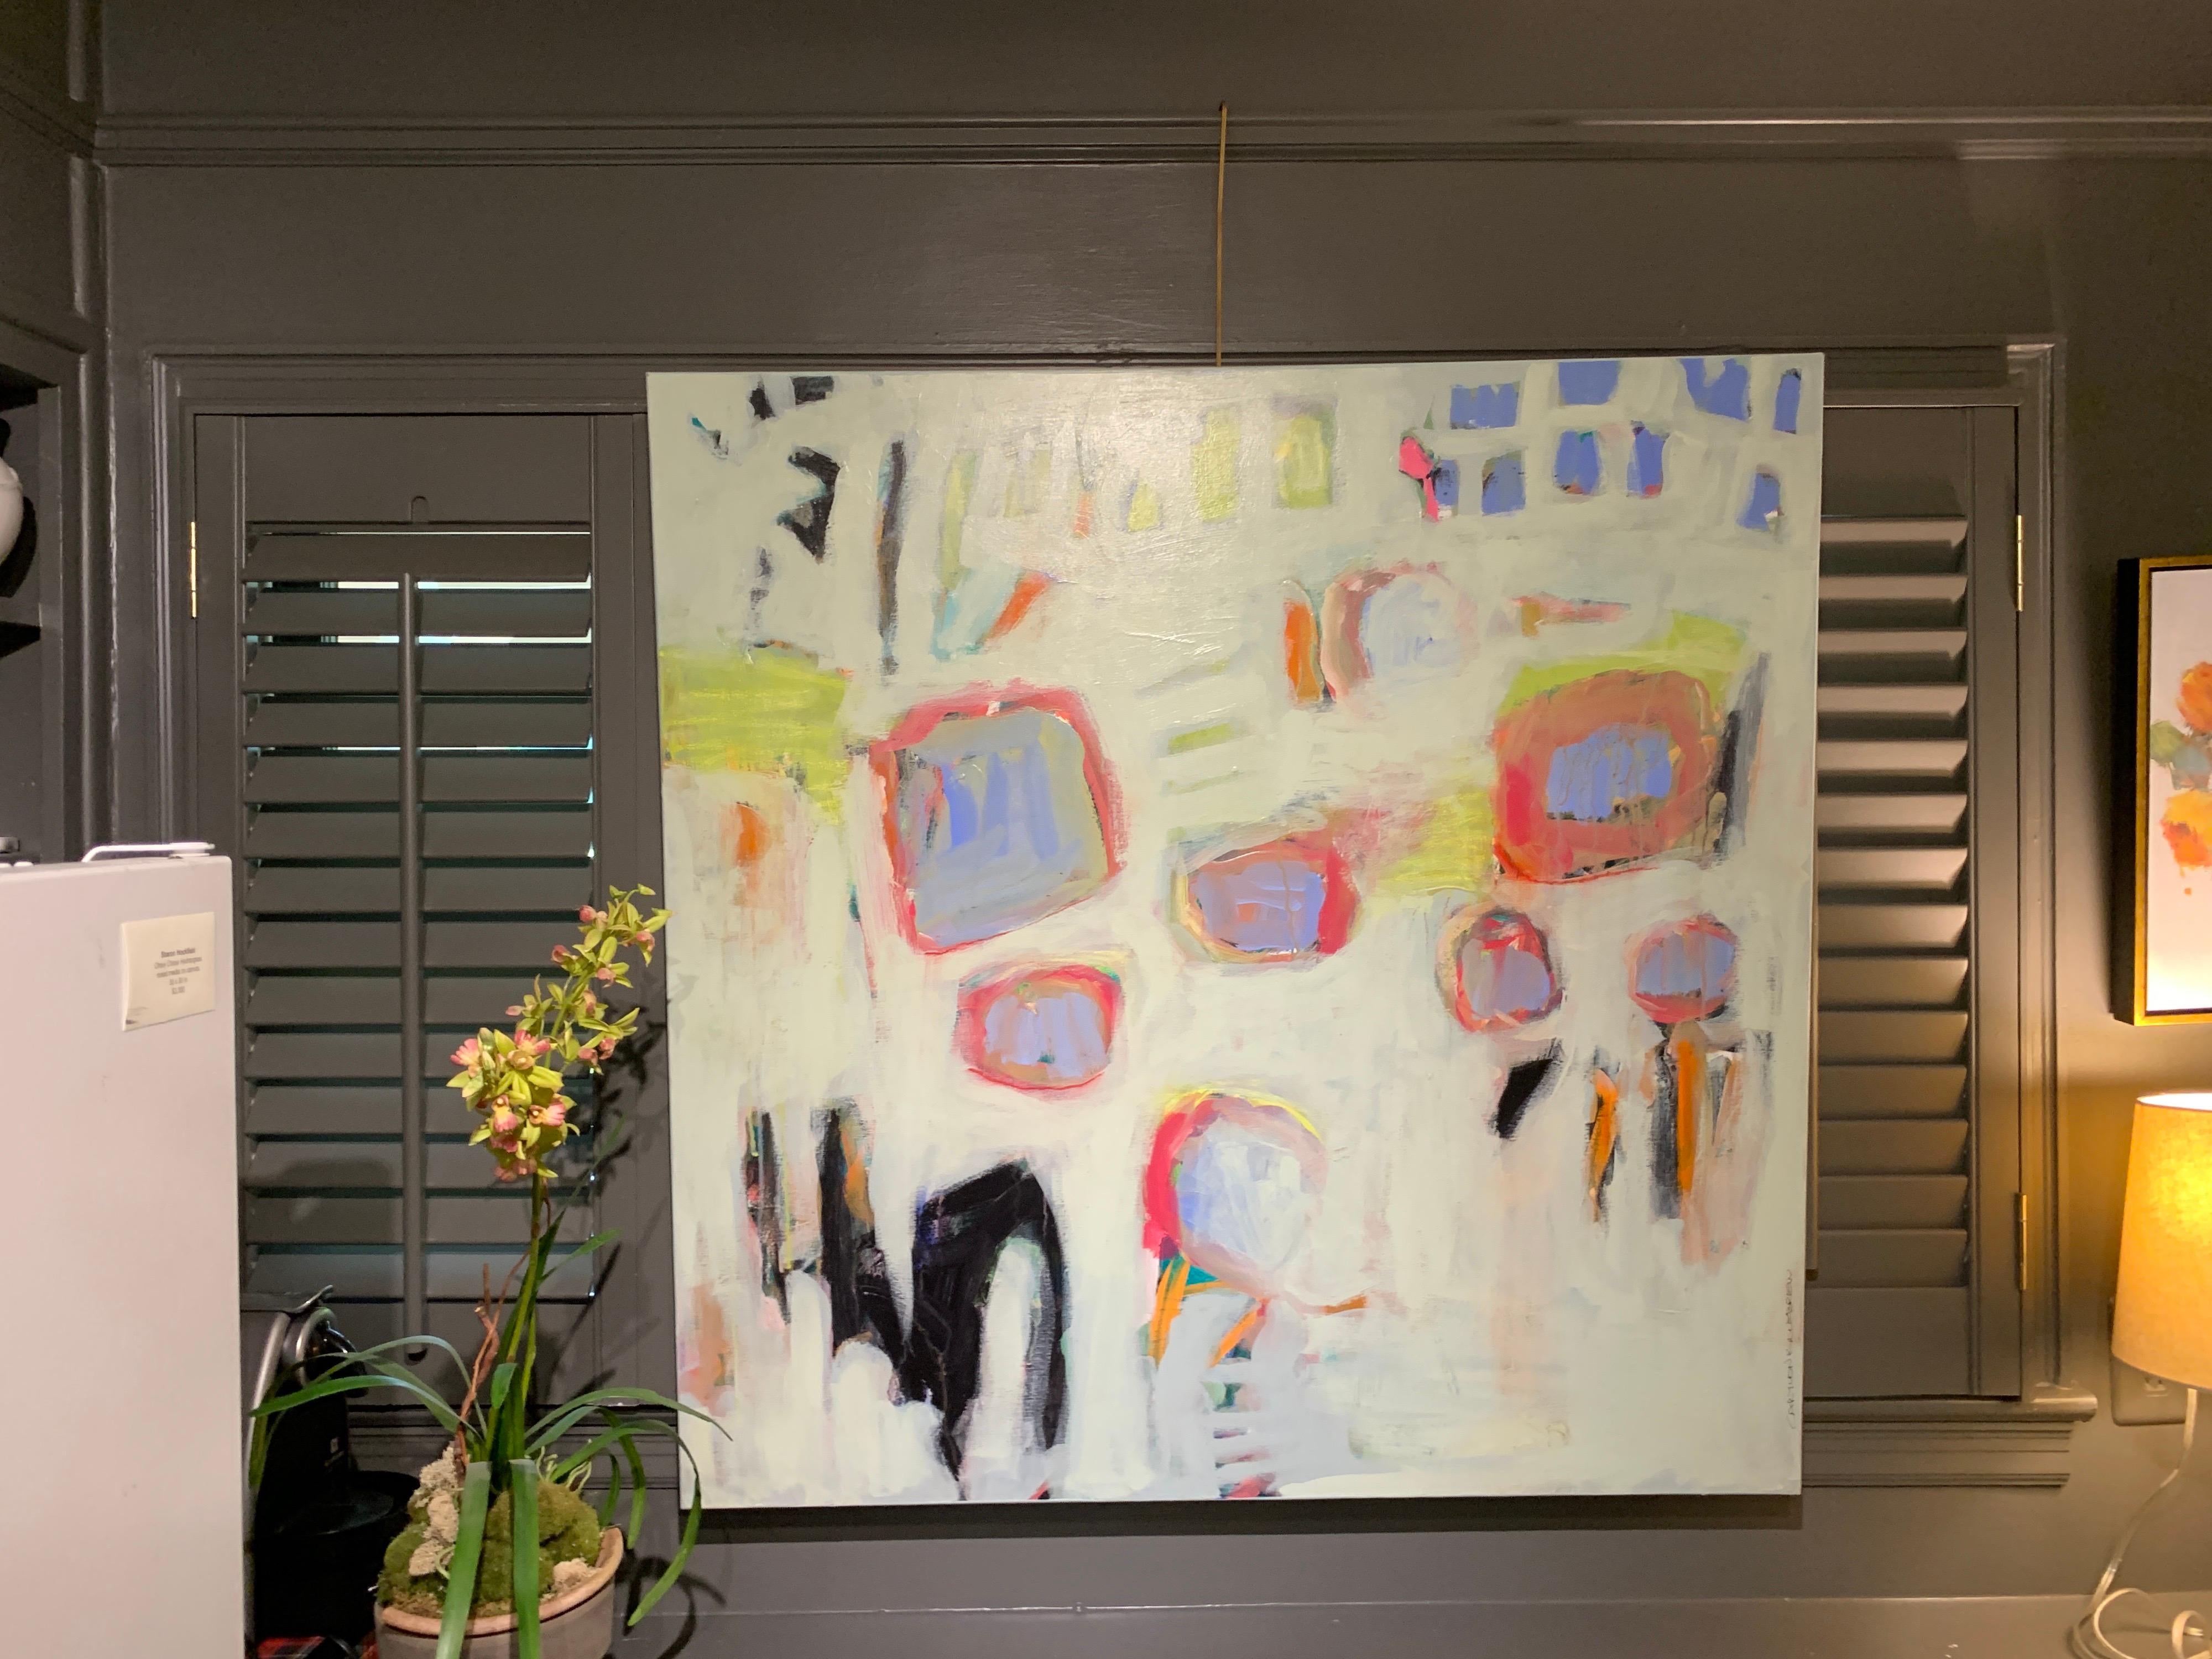 This contemporary piece by American artist Carylon Killebrew depicts an abstract view of the artist's garden.  The palette is made up of  cream, pink, blue, green and neutrals in the palette.  The artist uses her brush strokes to convey color and